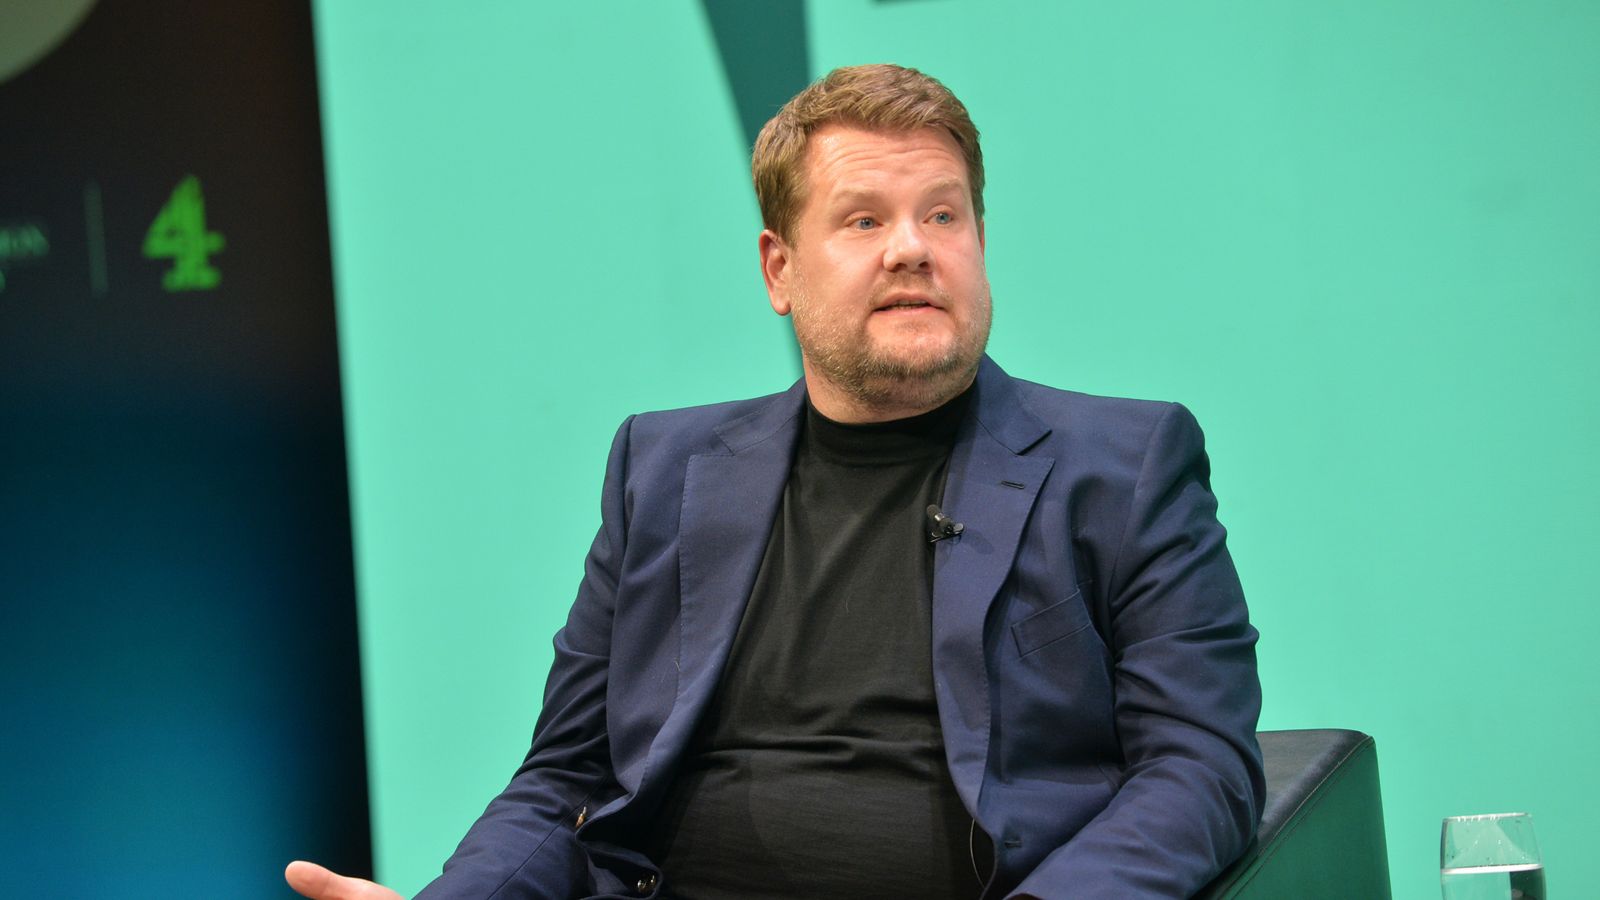 James Corden on leaving his talk show, flying with Tom Cruise and whether he'll do more Gavin & Stacey